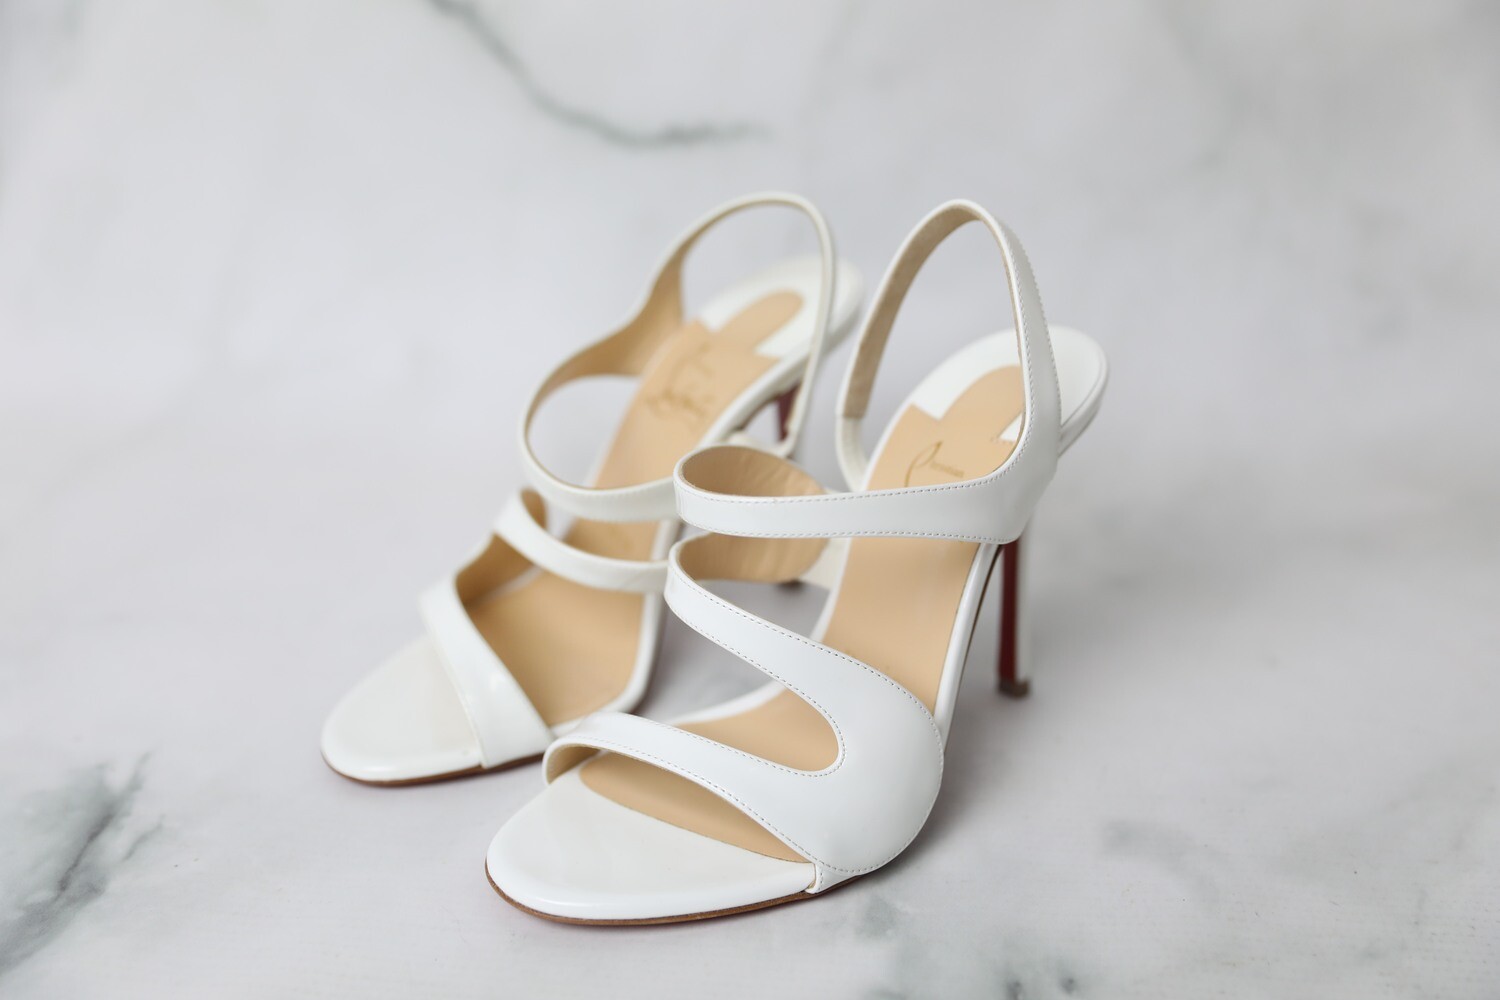 Shoes, White Red Bottom Heels